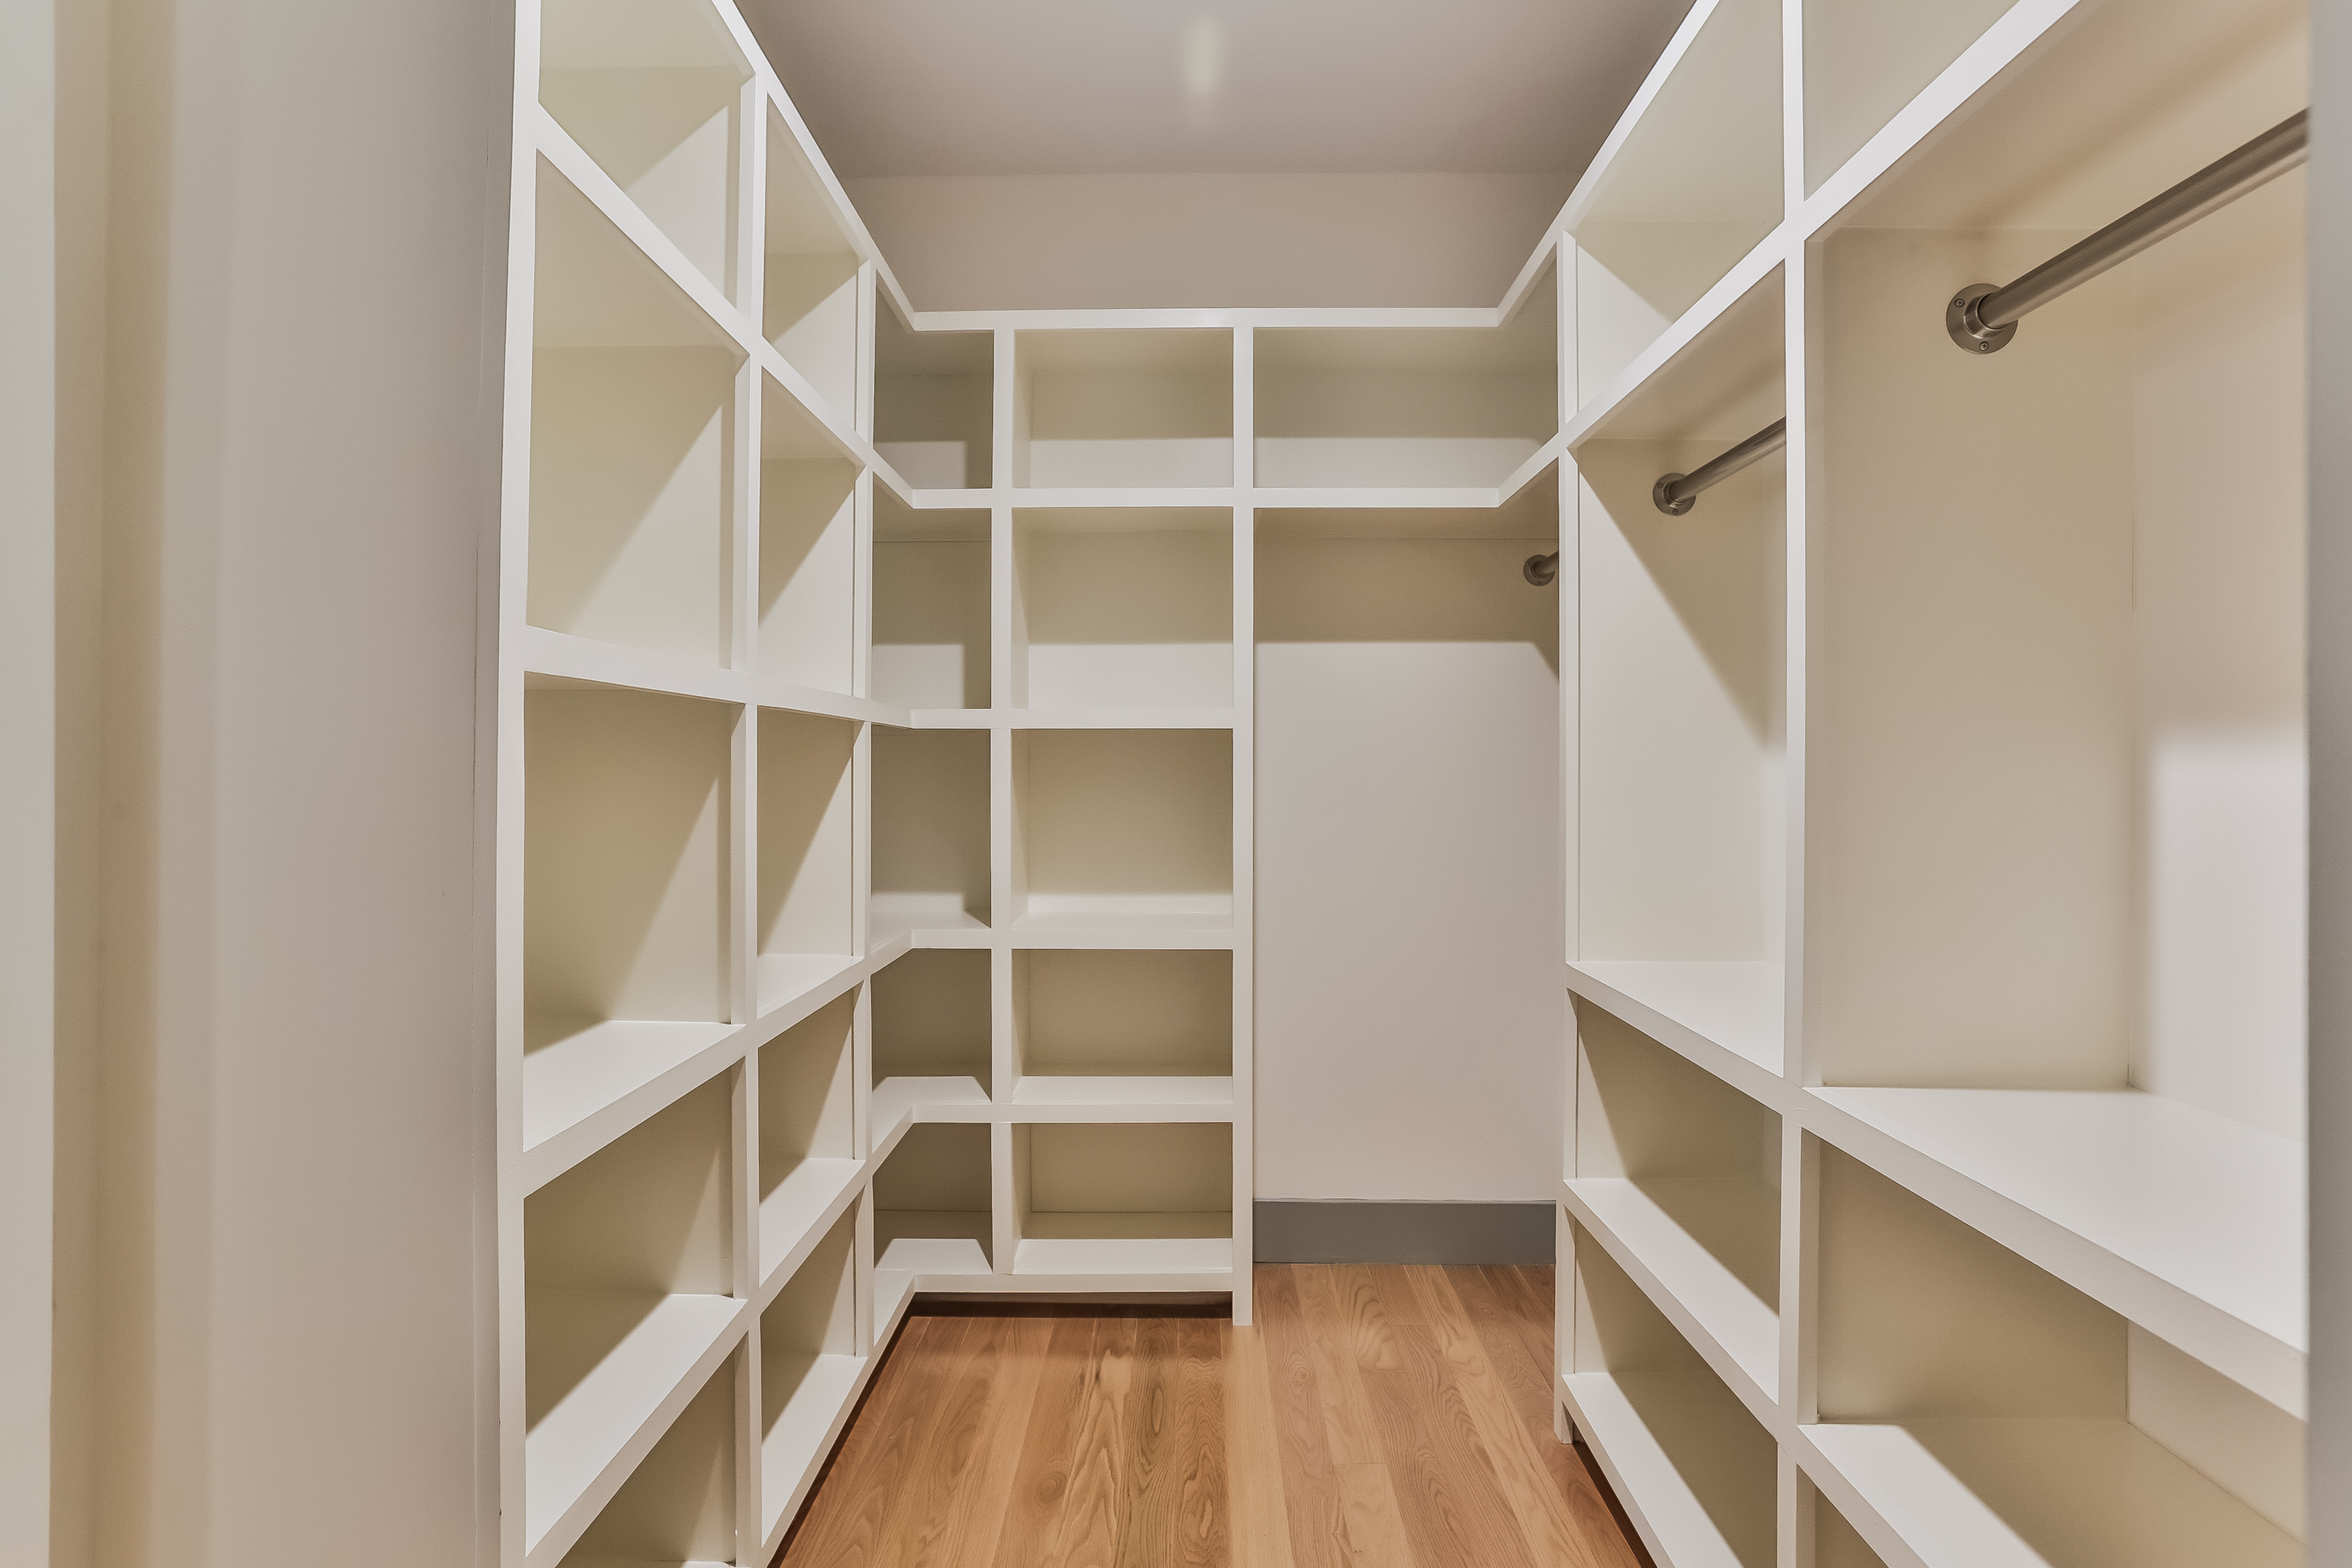 Large walk-in closets